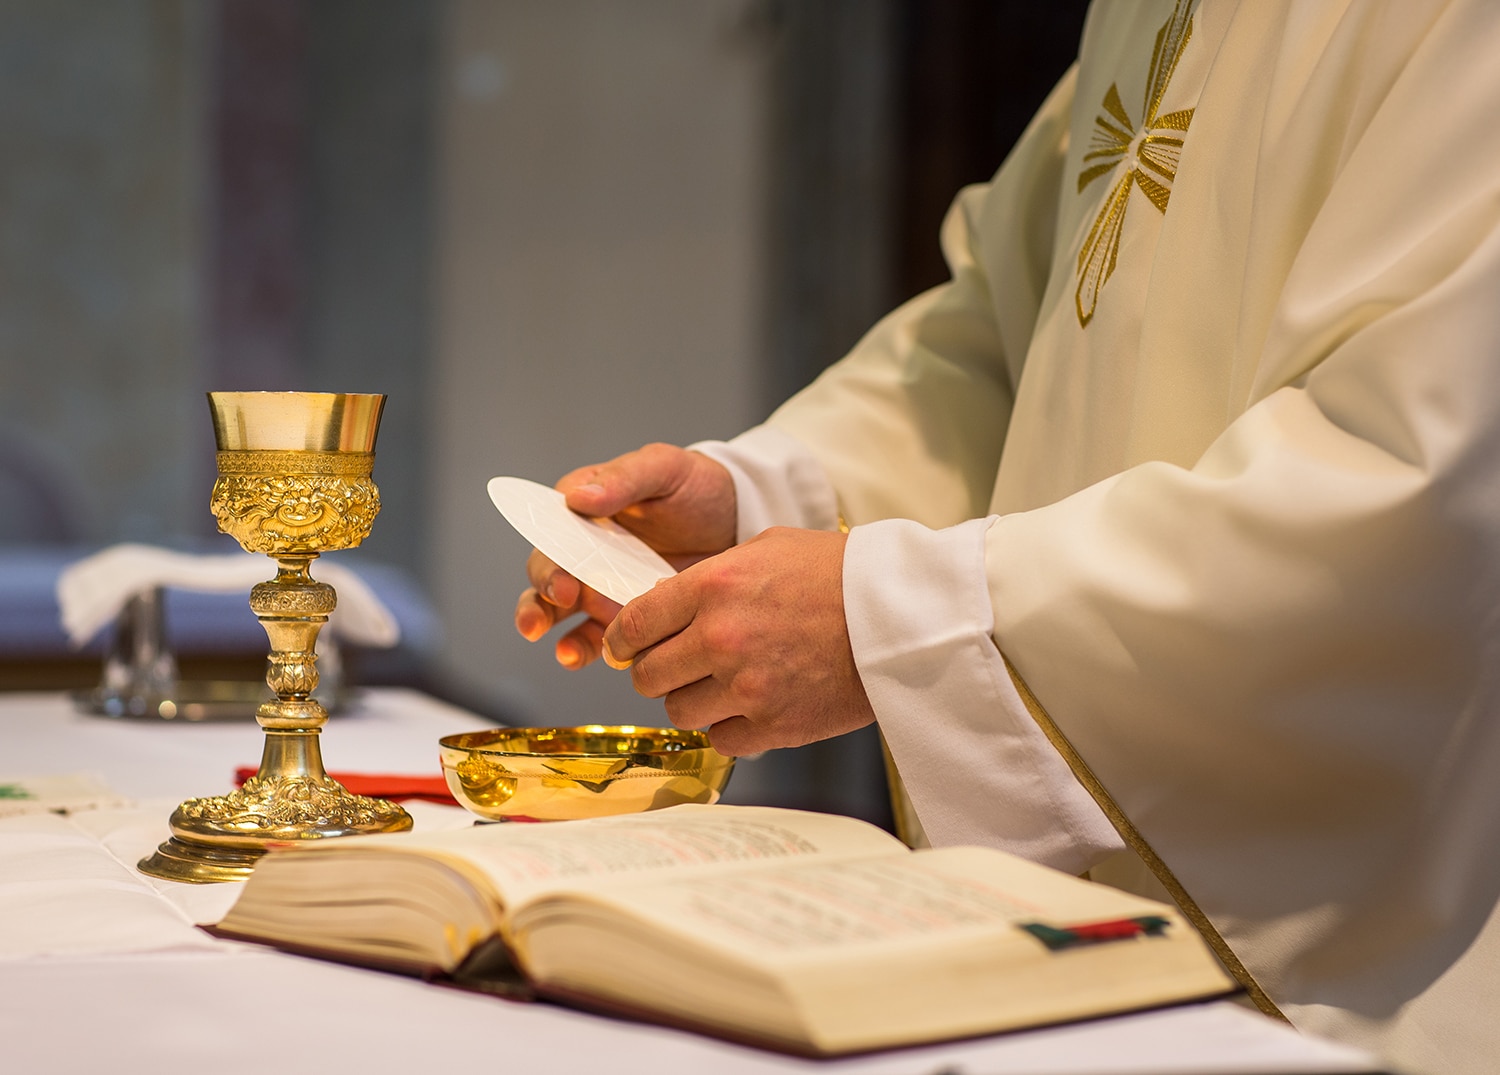 A priest's hands as he prepares Holy Communion